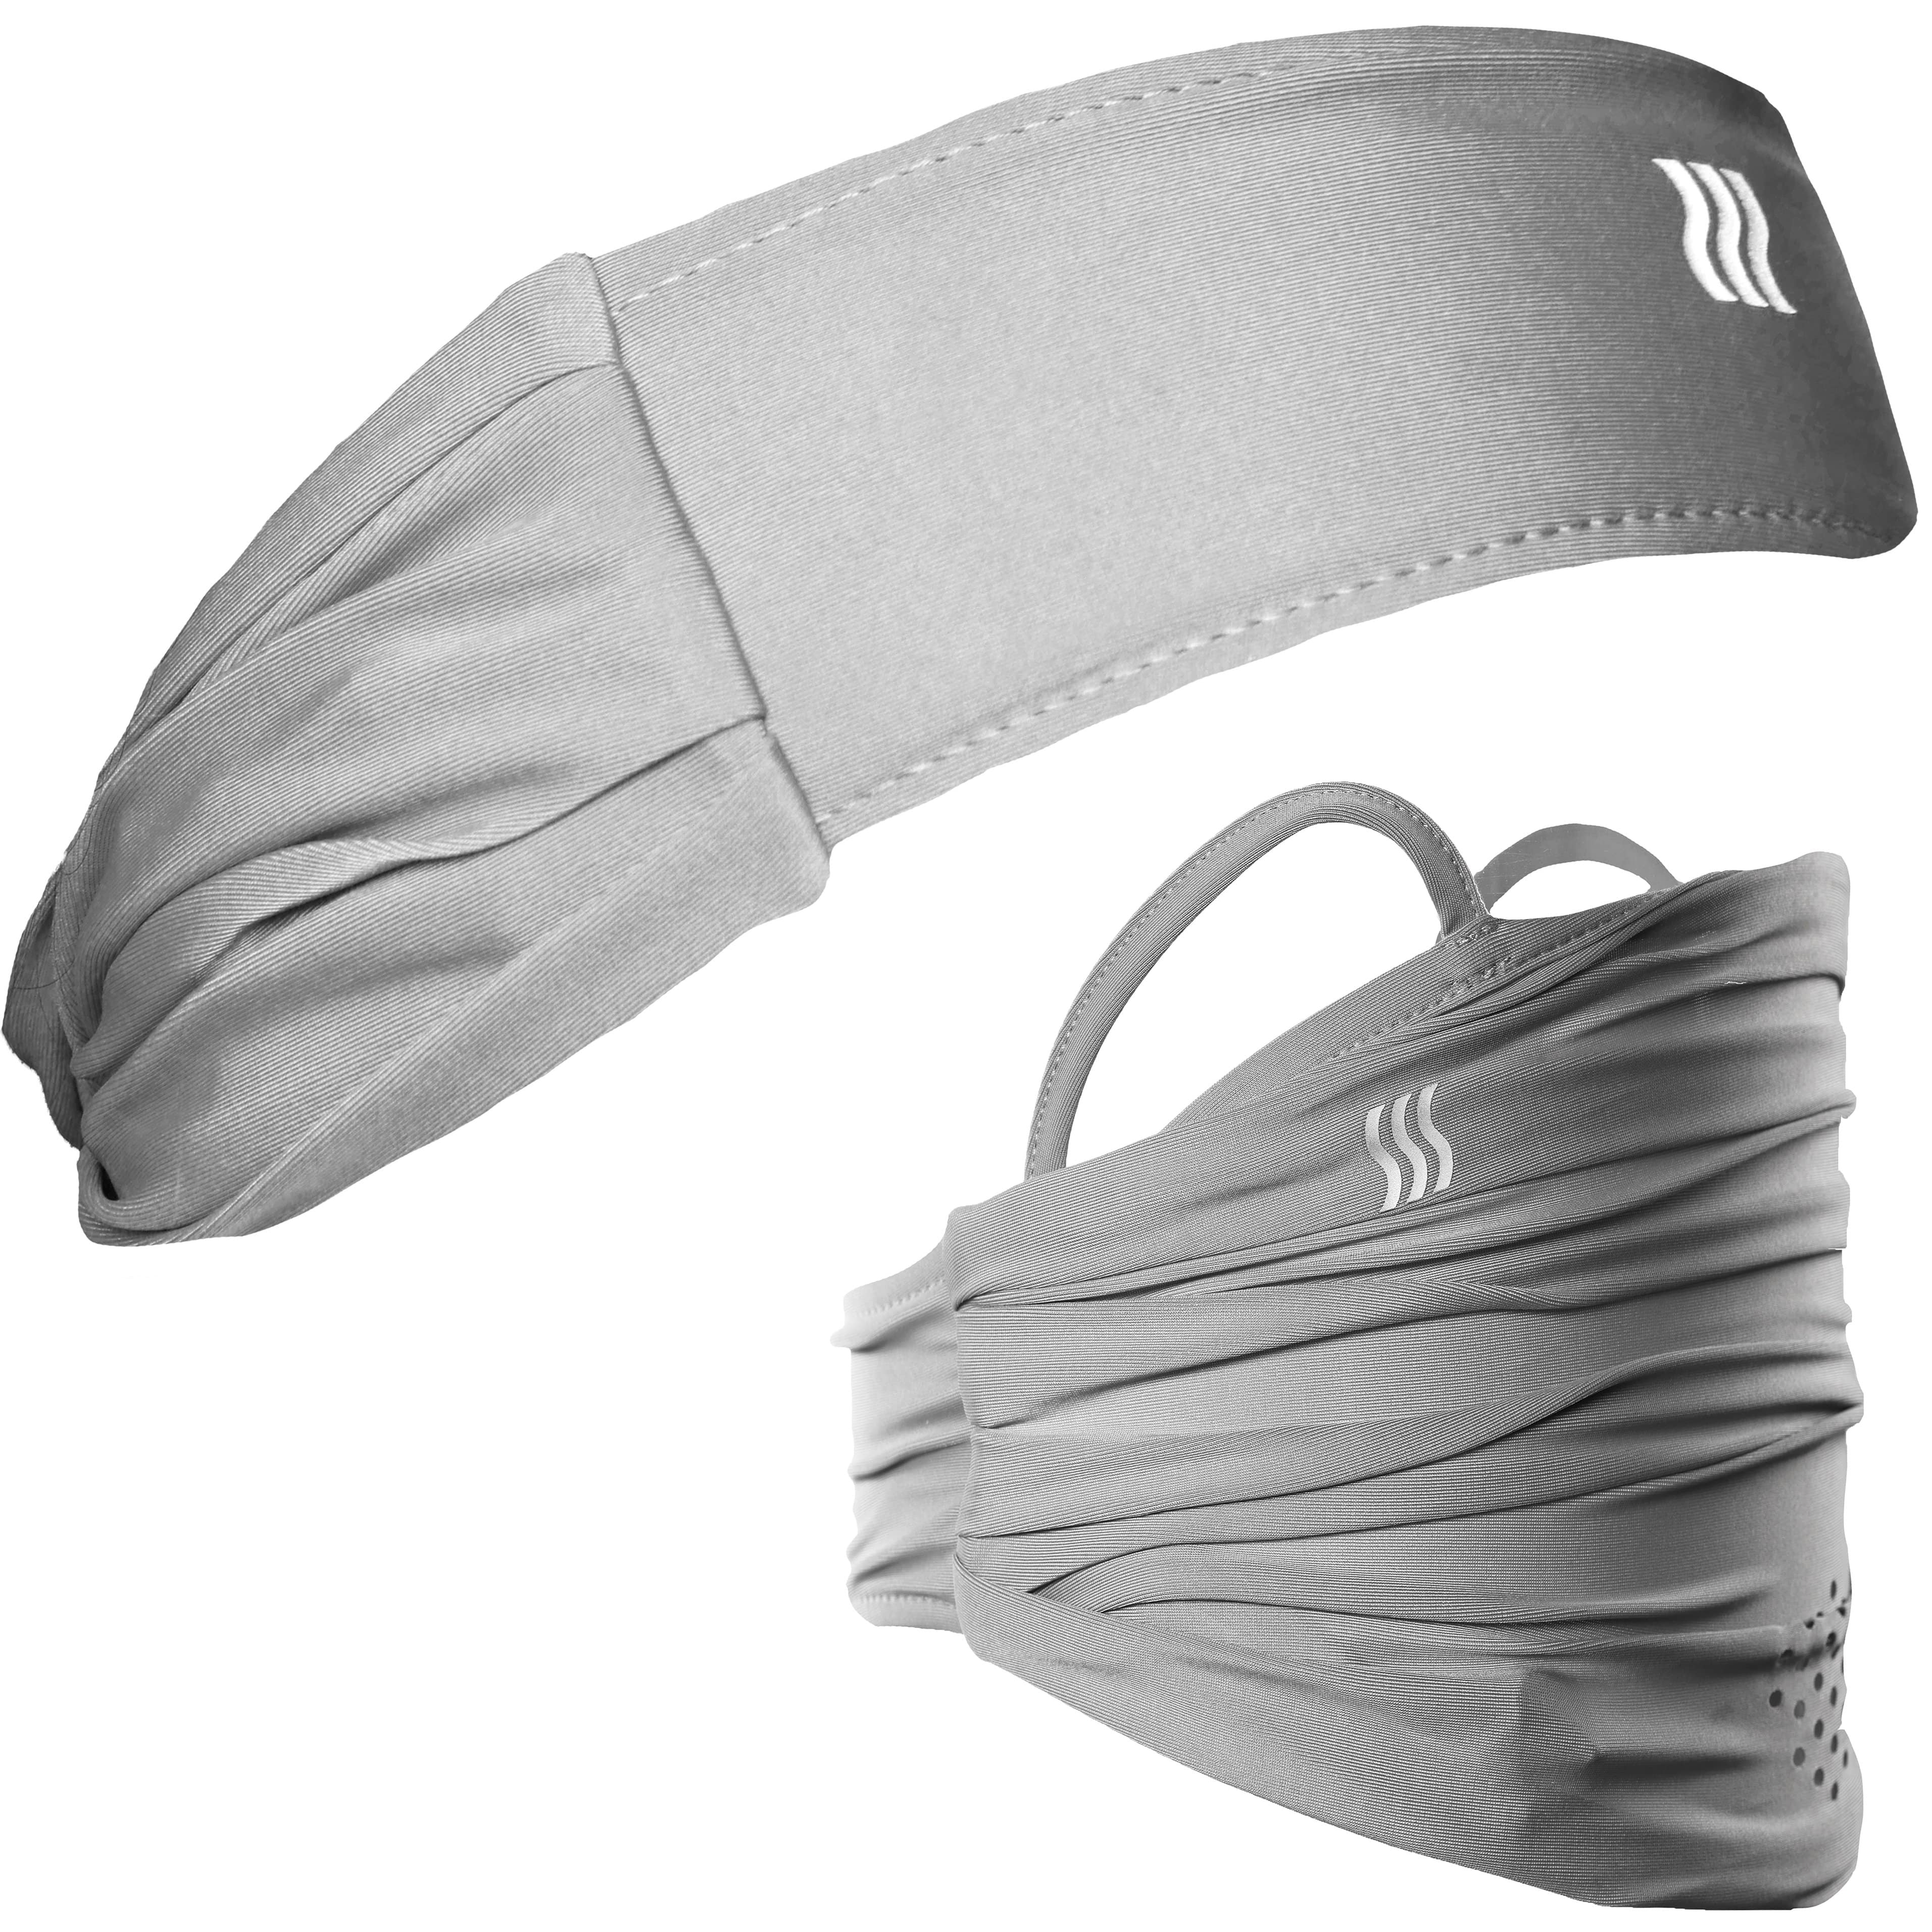 Grey headband that can be worn as a face mask and neck gaiter.